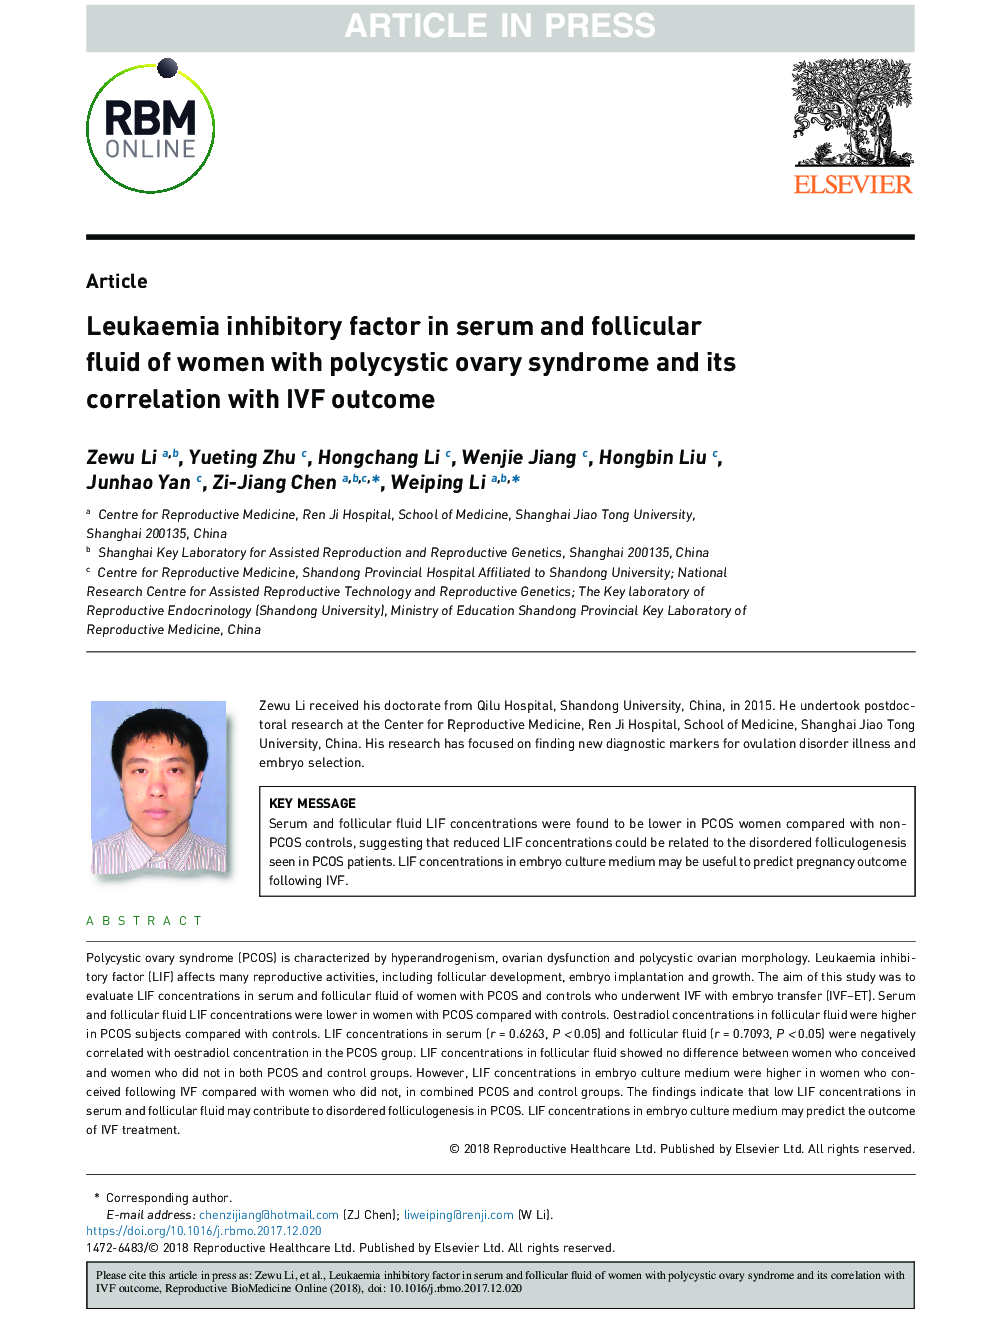 Leukaemia inhibitory factor in serum and follicular fluid of women with polycystic ovary syndrome and its correlation with IVF outcome